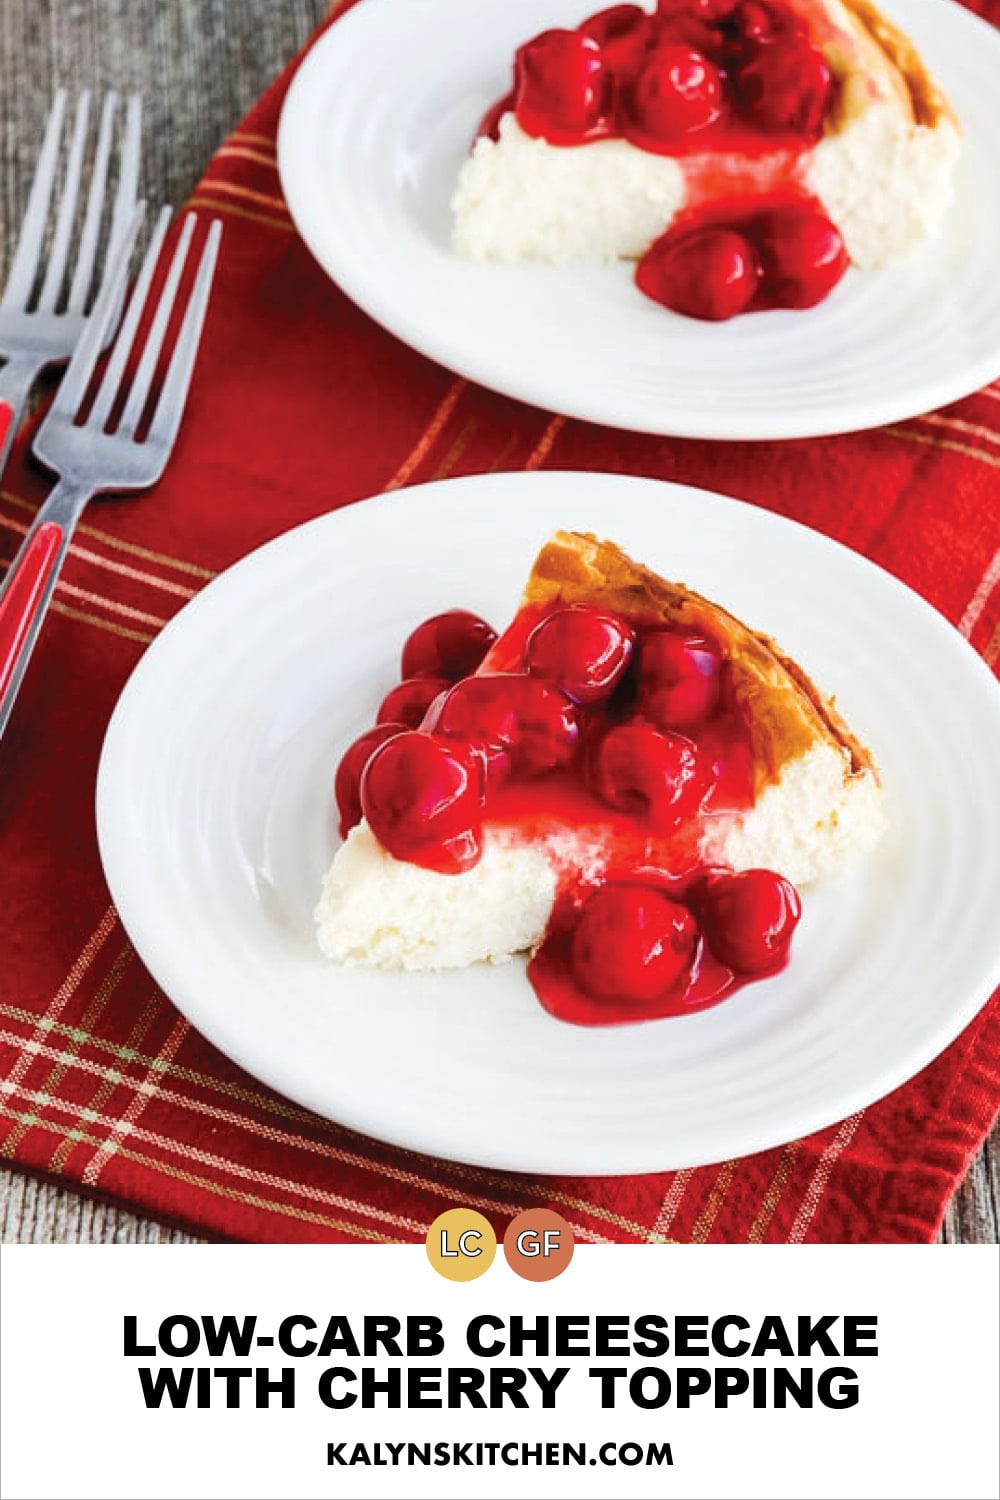 Pinterest image of Low-Carb Cheesecake with Cherry Topping